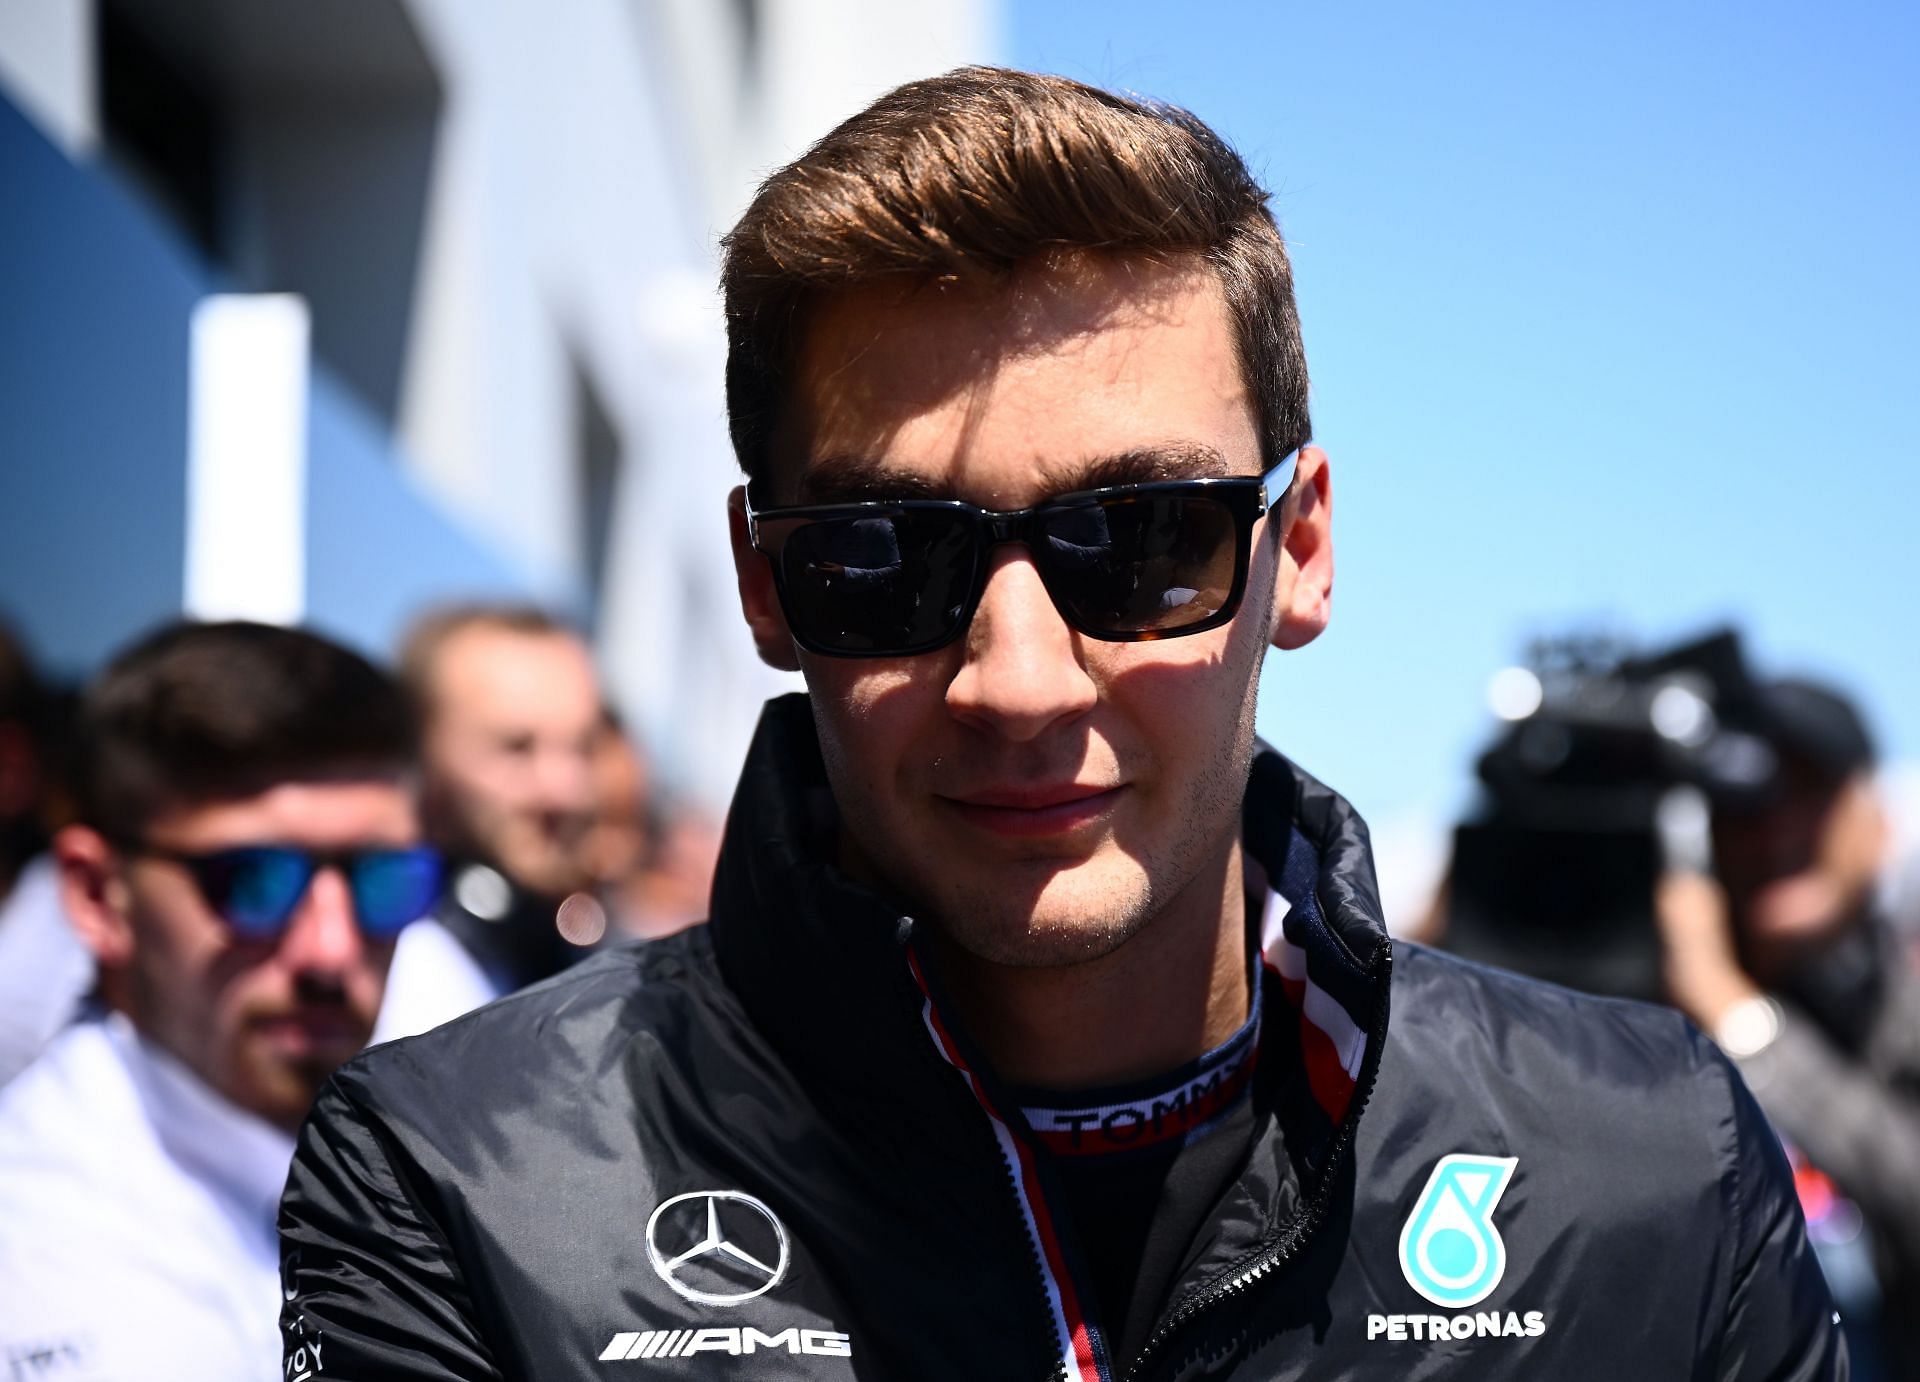 George Russell looks on in the Paddock ahead of the 2022 F1 Grand Prix of Canada (Photo by Clive Mason/Getty Images)